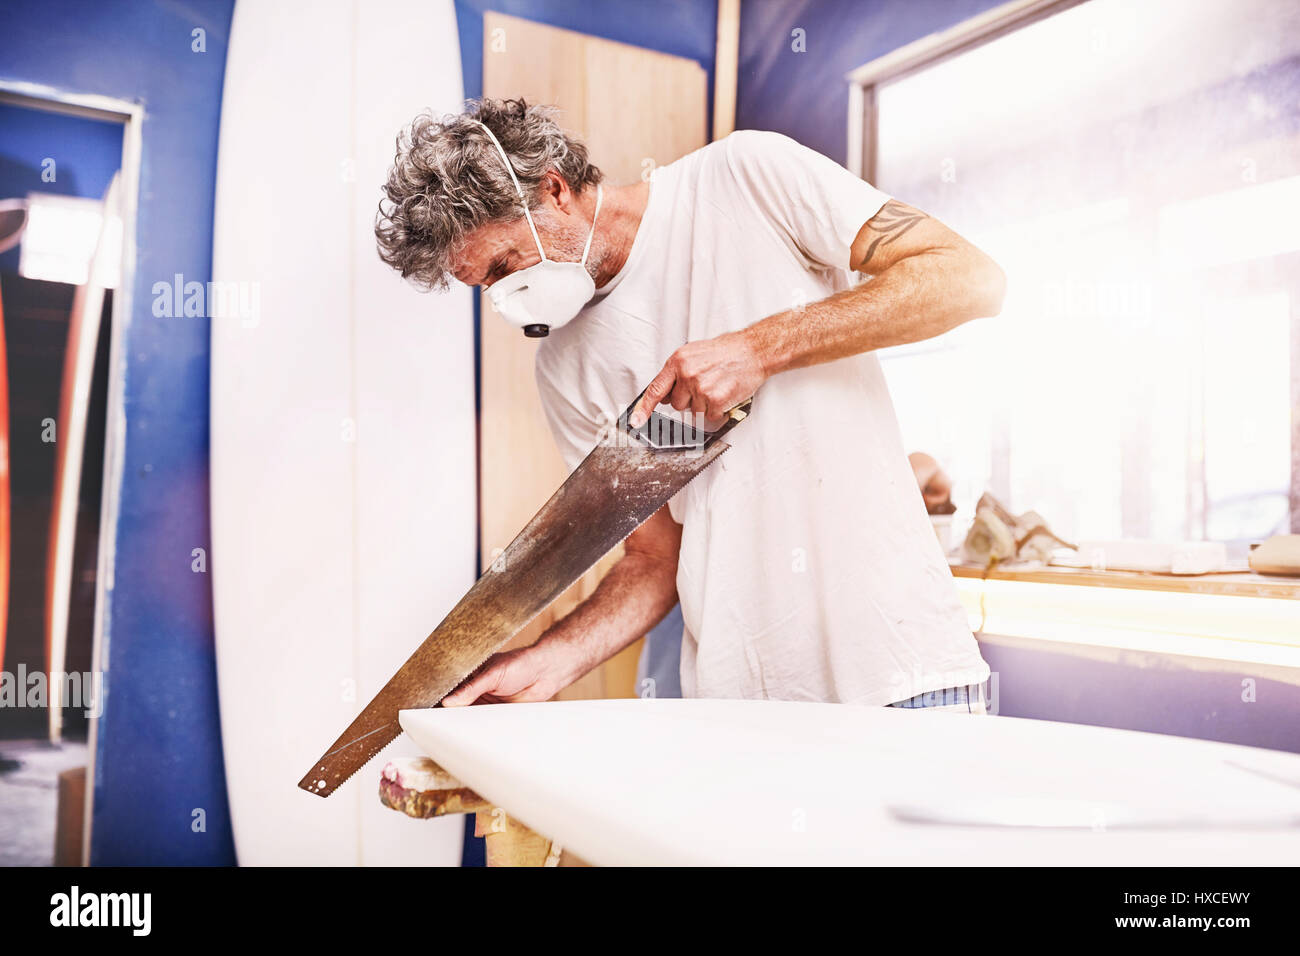 Male surfboard designer wearing protective mask and using saw in workshop Stock Photo